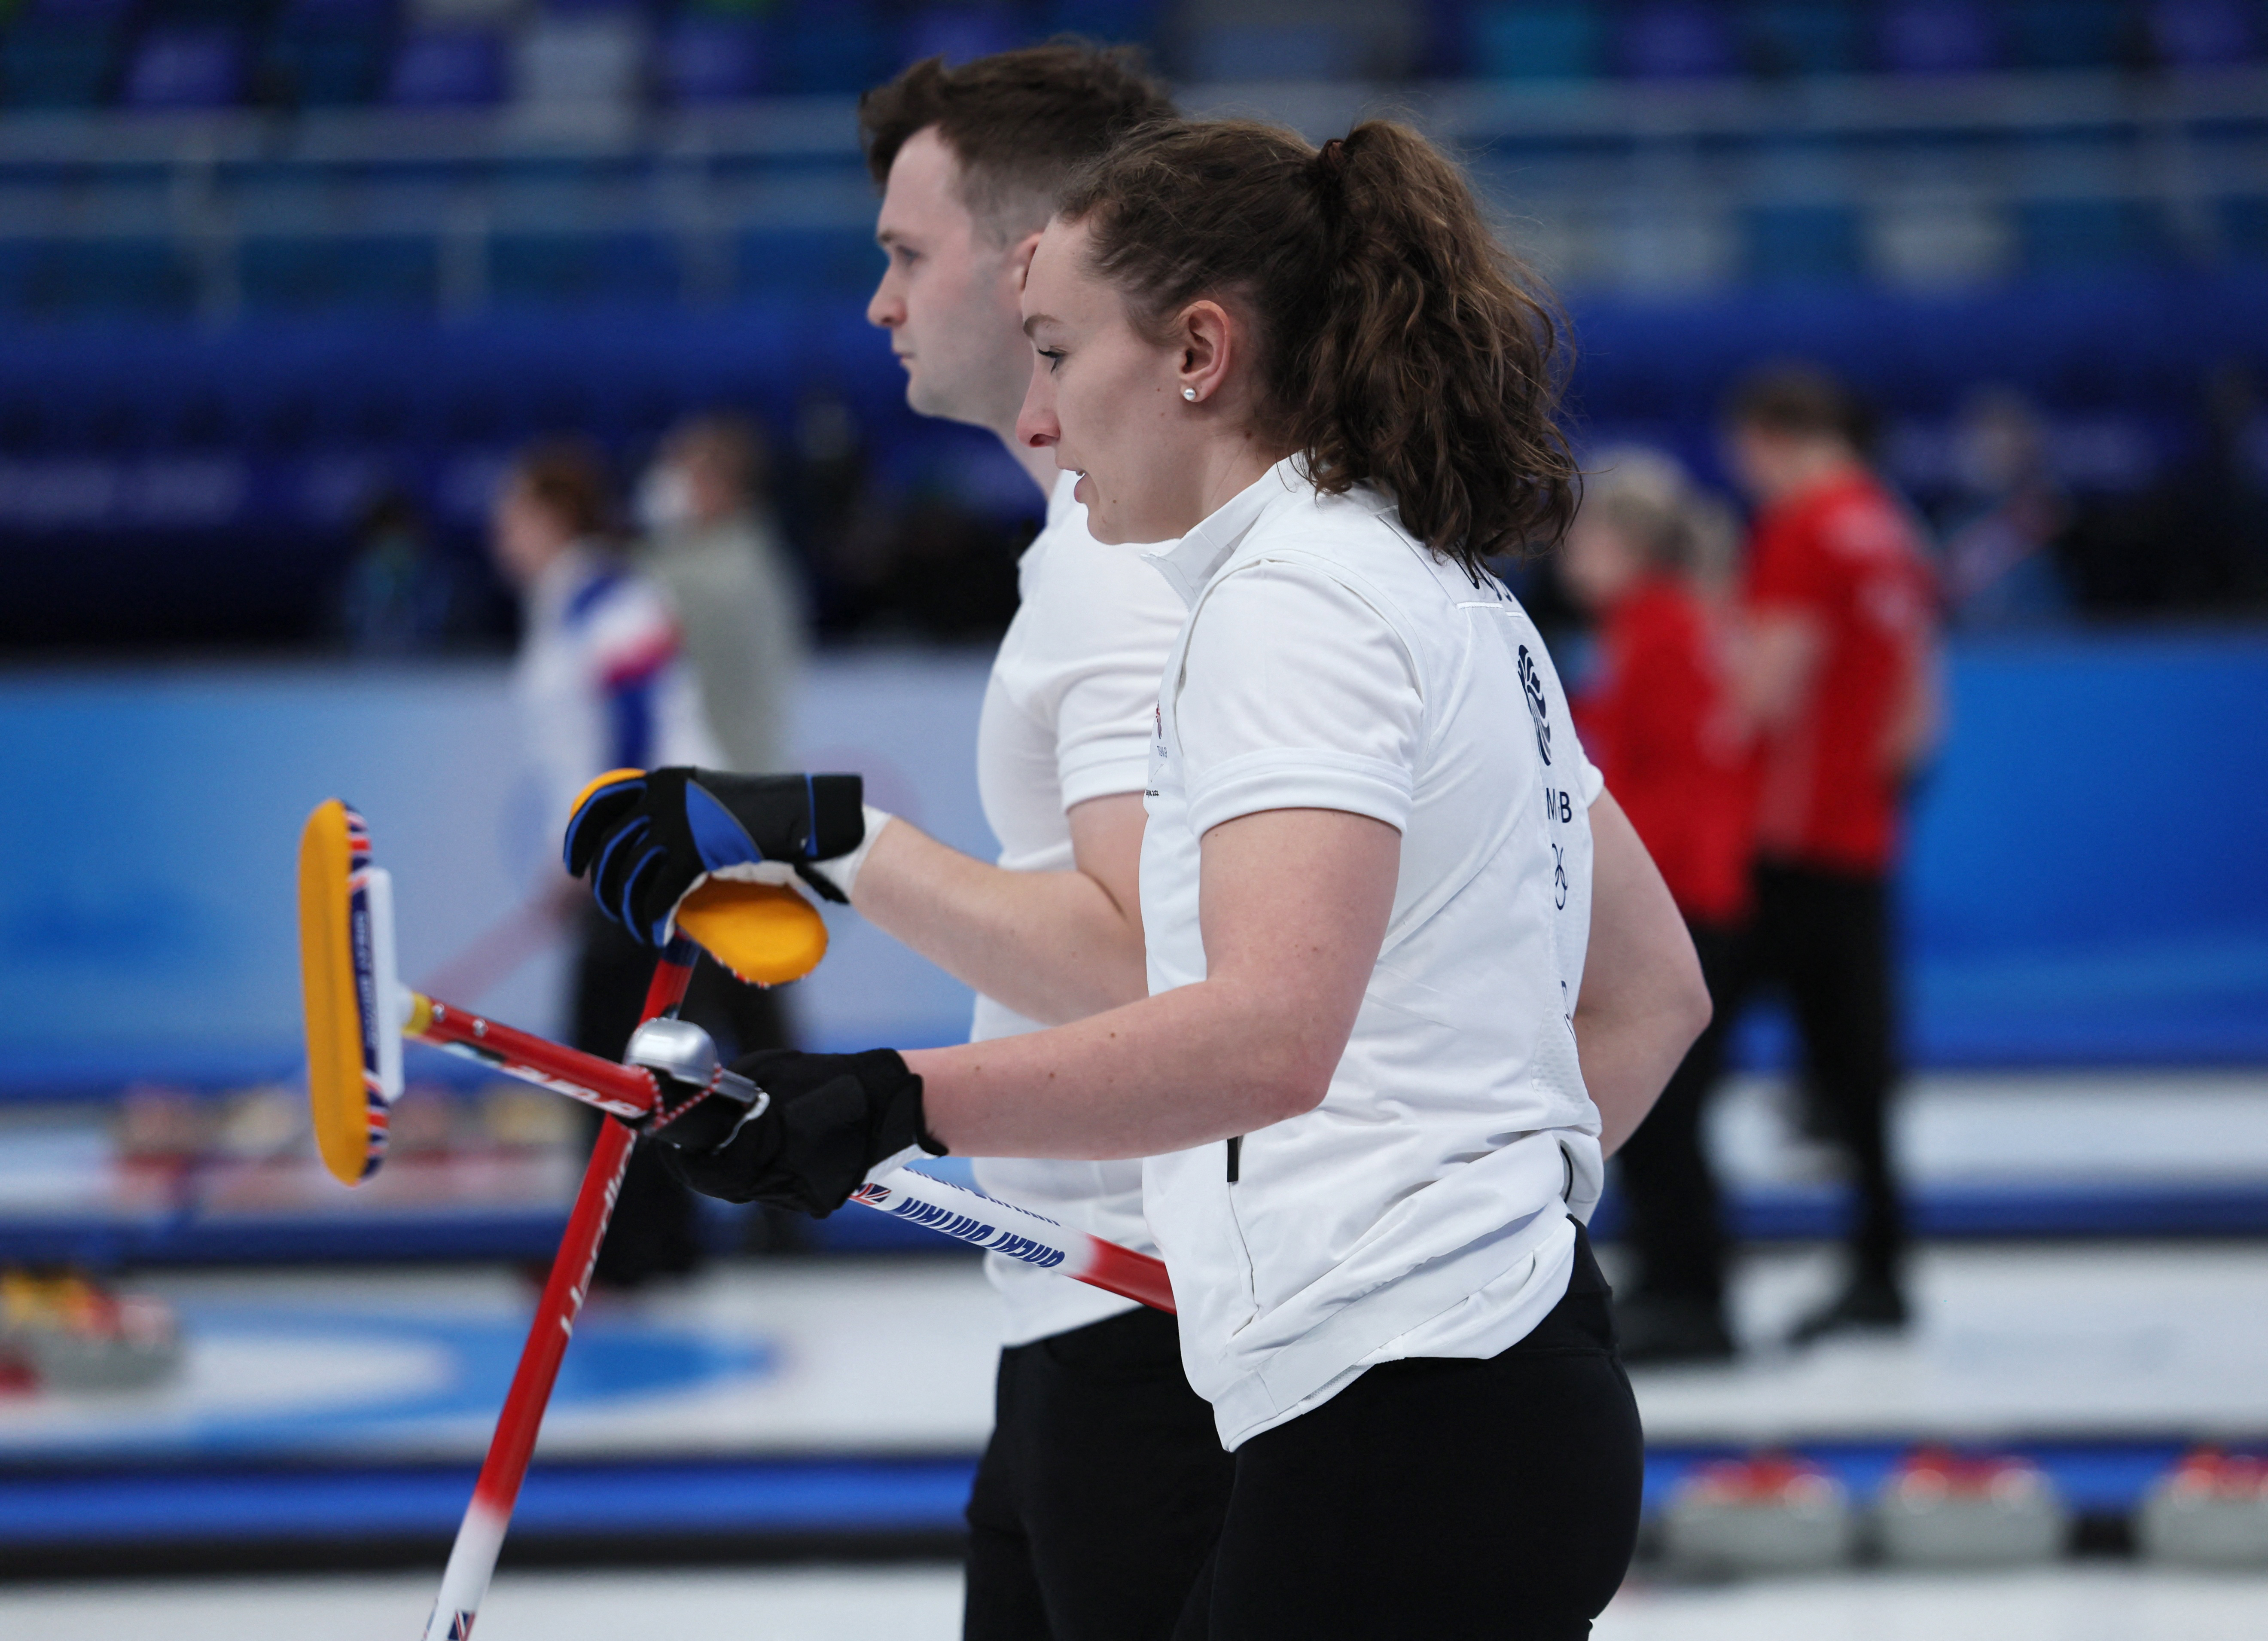 Curling - Mixed Doubles Round Robin Session 1 - Sweden v Britain